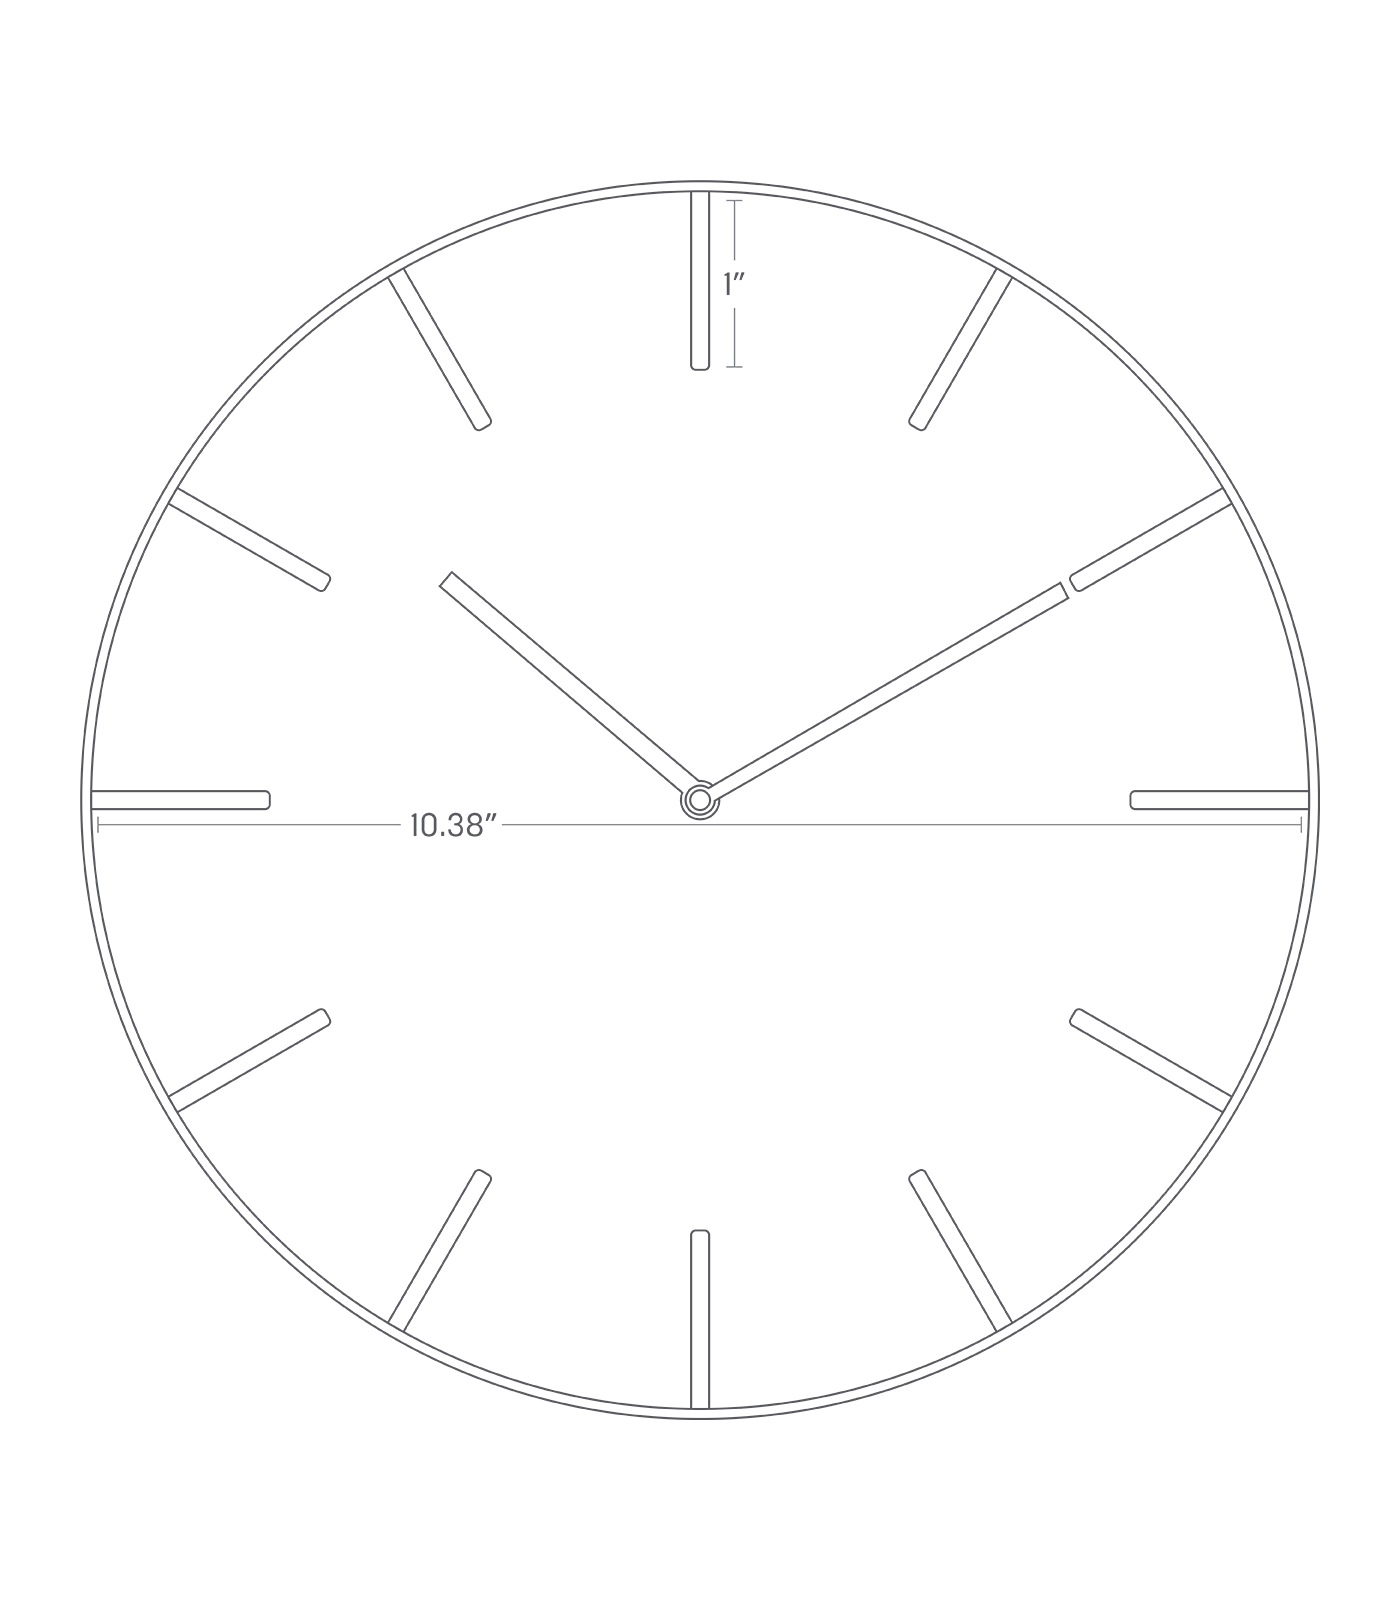 Dimension image for Wall Clock on a white background including dimensions  L 1.65 x W 10.43 x H 10.43 inches